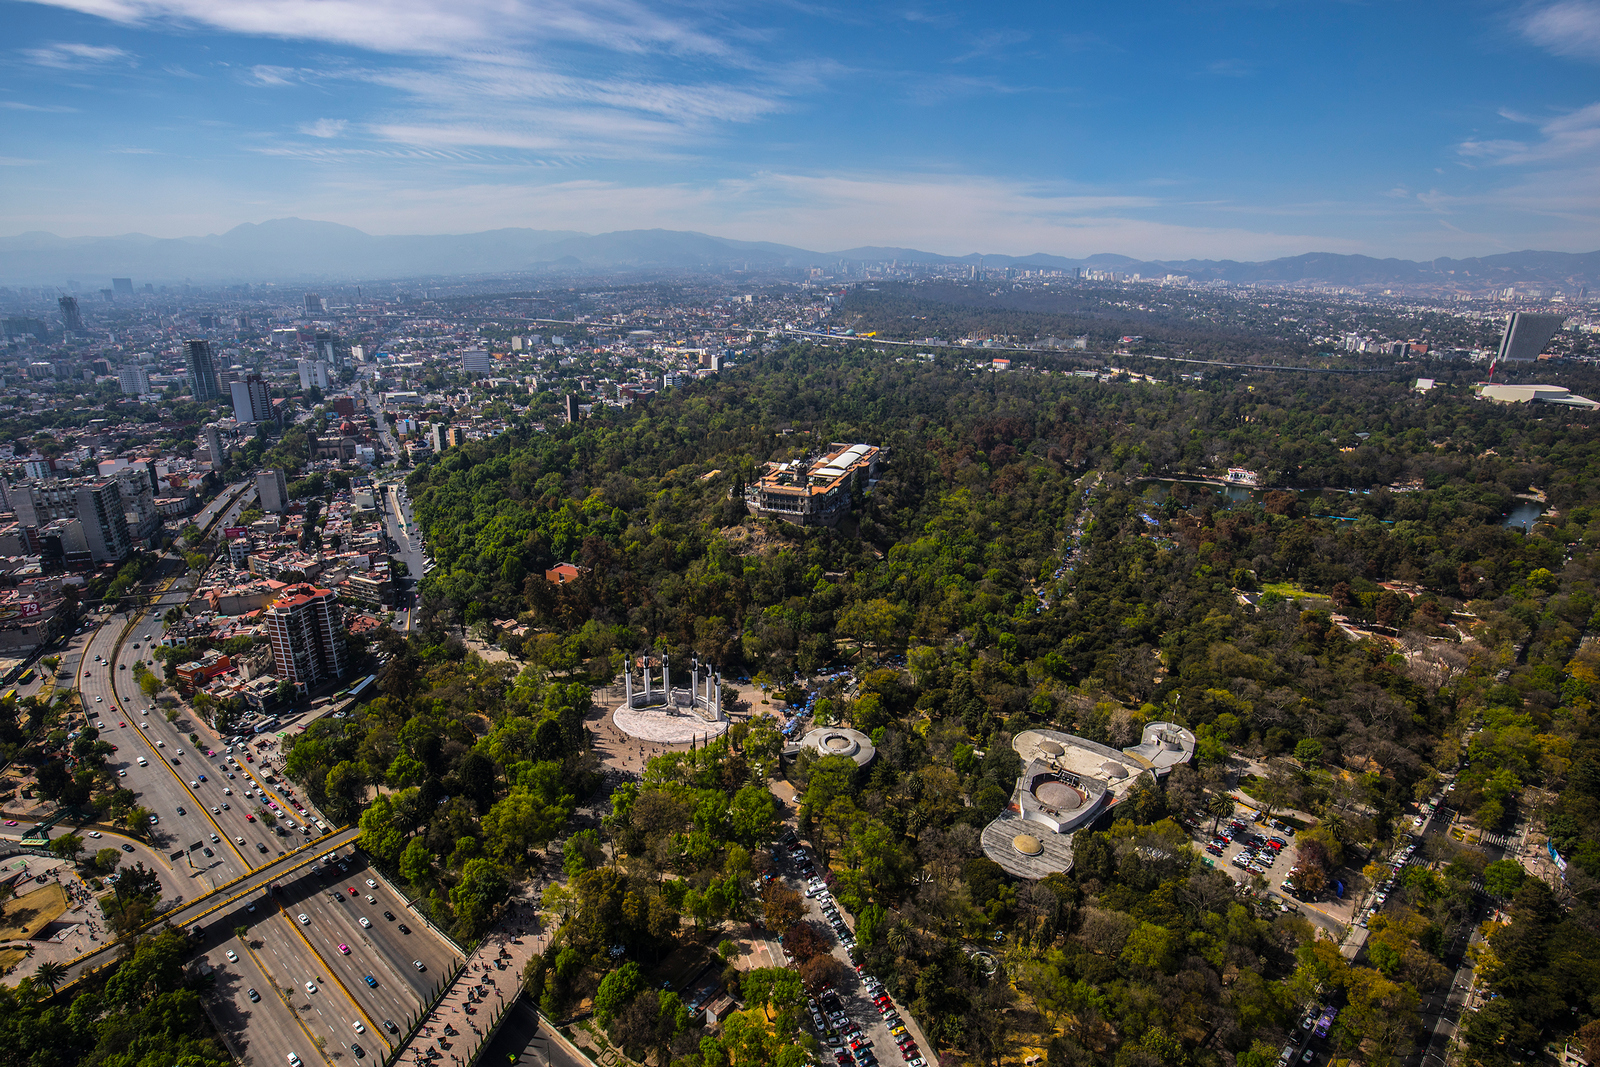 Overview of Chapultepec Park (Credit: Government of Mexico City, used under Creative Commons CC0)